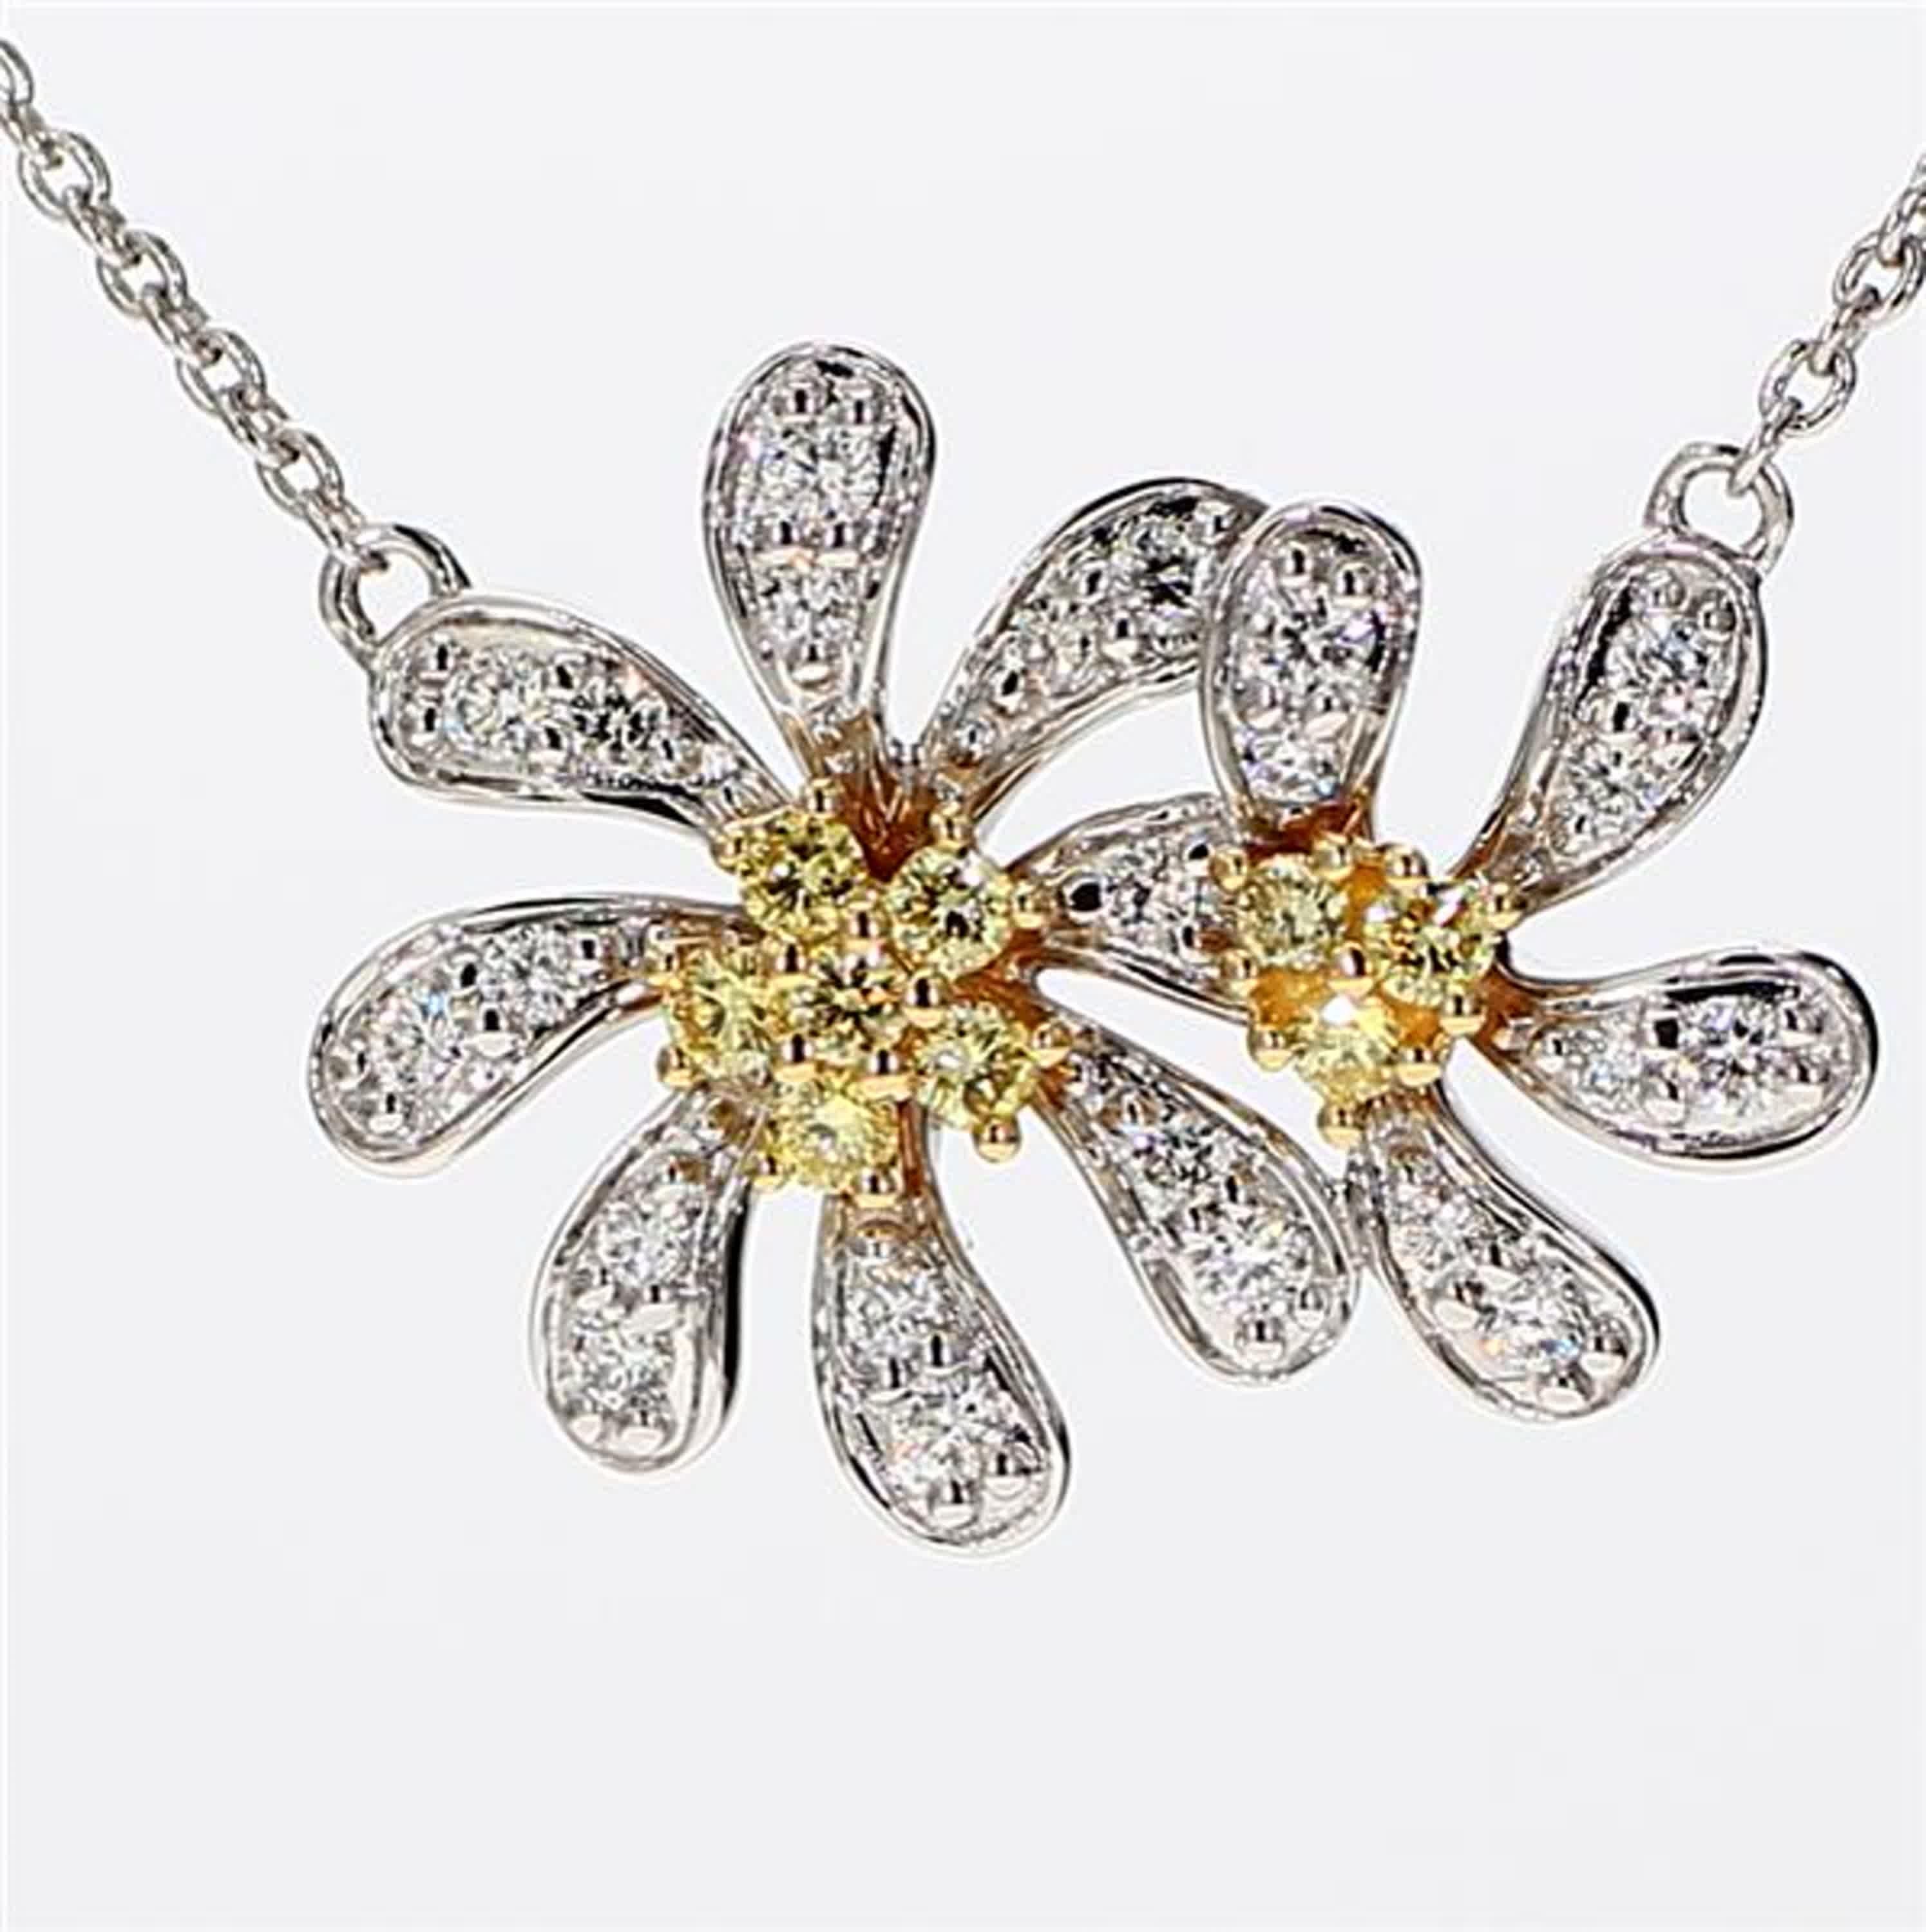 RareGemWorld's classic diamond pendant. Mounted in a beautiful 18K Yellow and White Gold setting with natural round yellow diamond melee complimented by natural round white diamond melee. This pendant is guaranteed to impress and enhance your